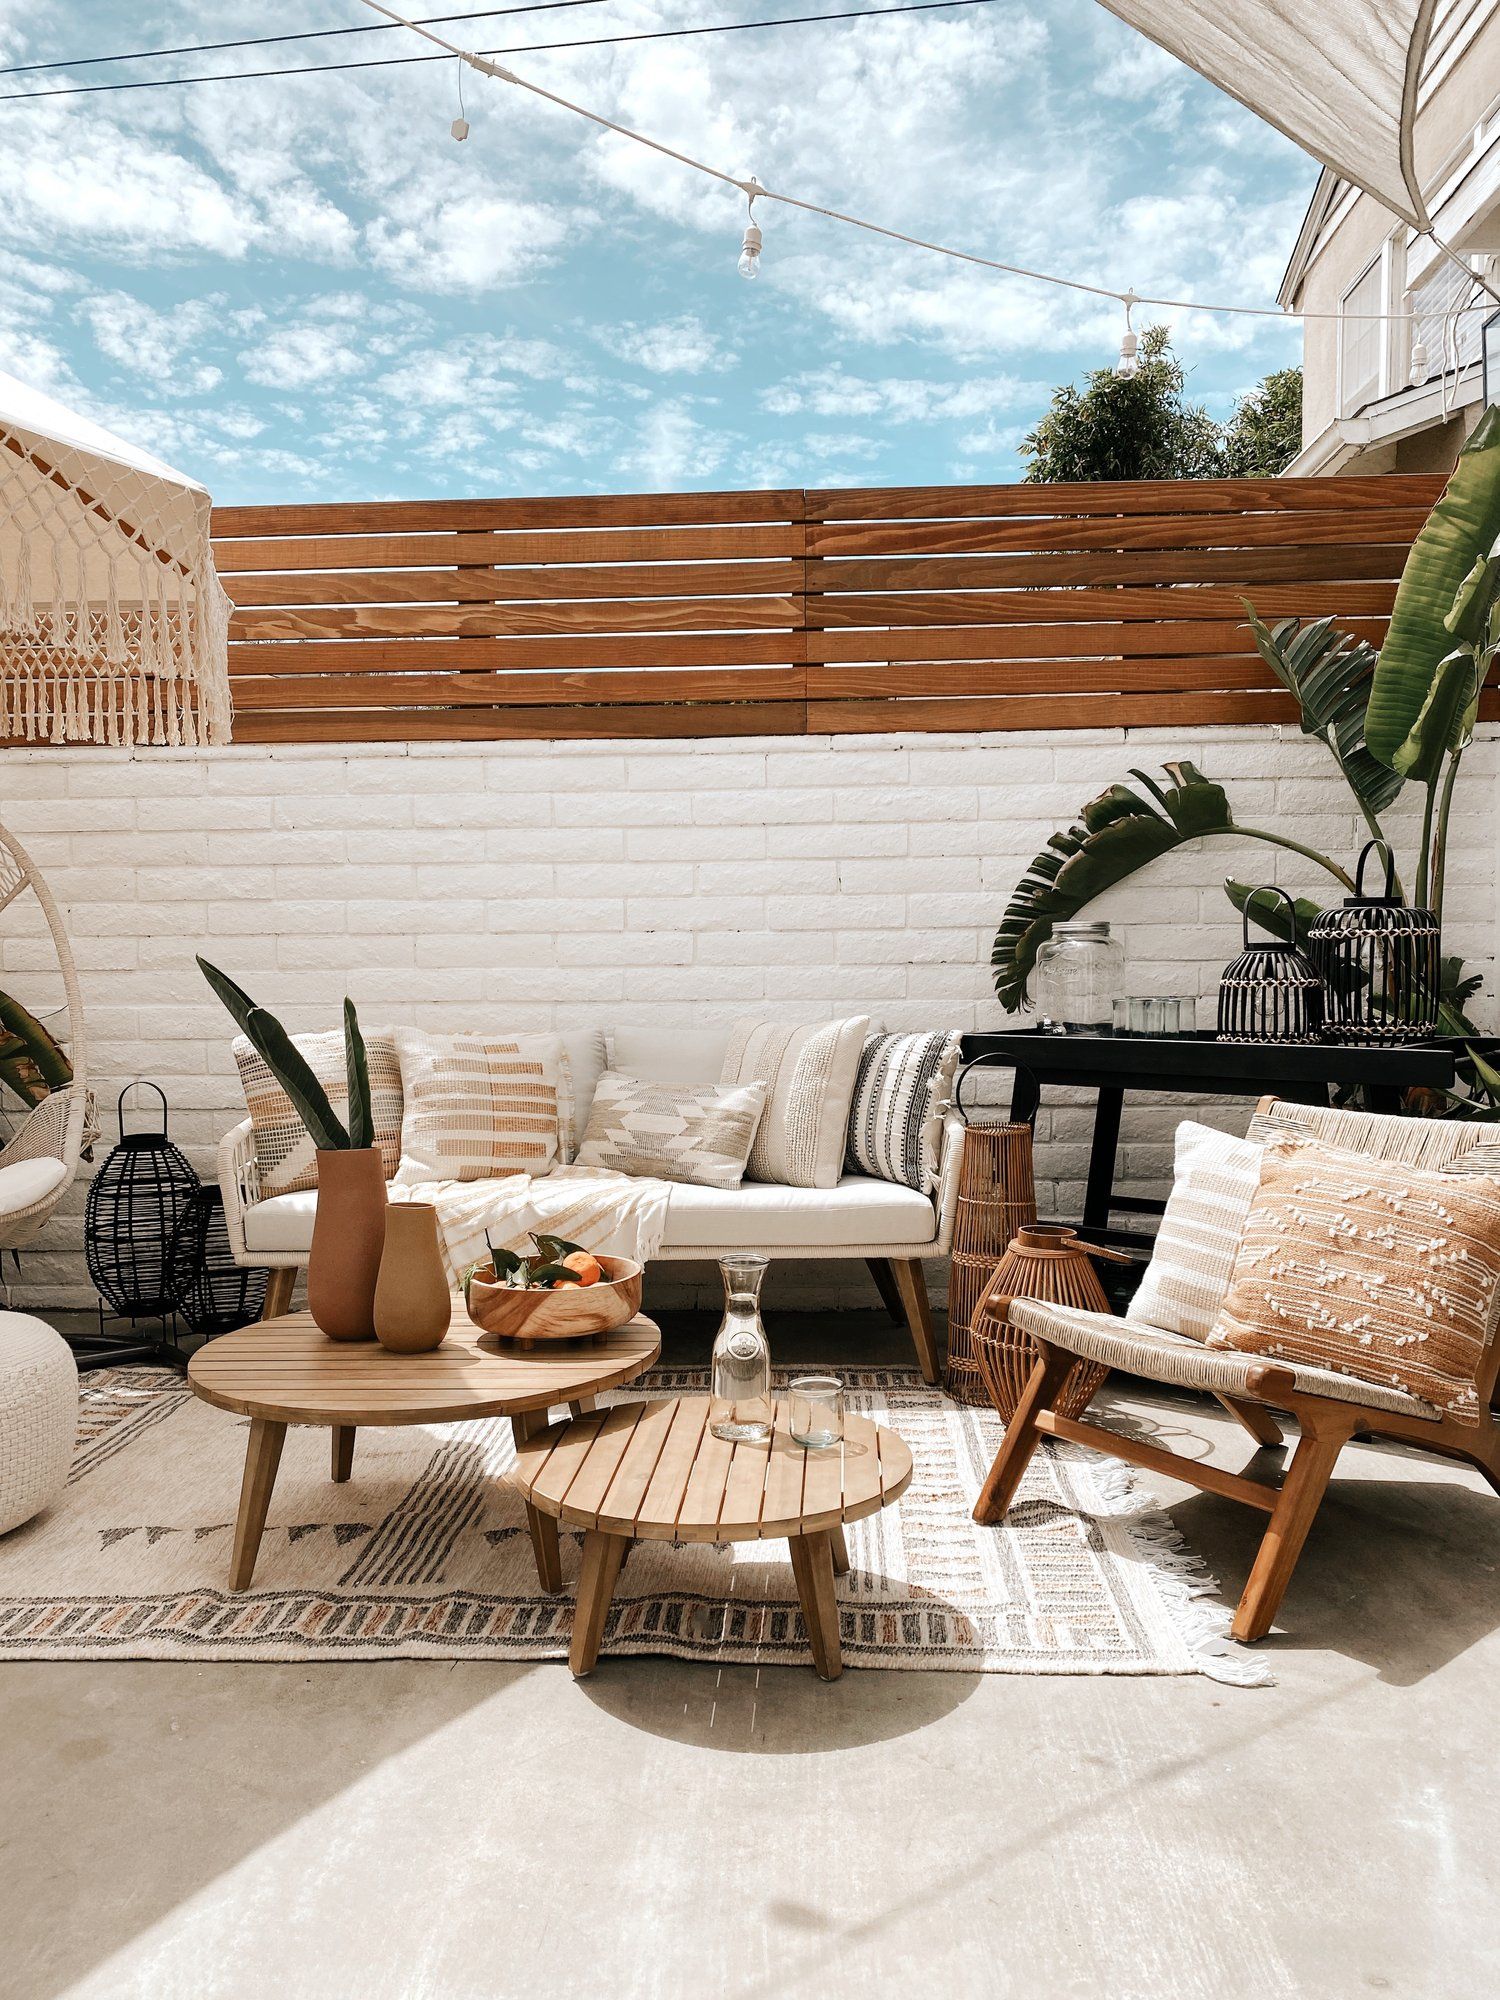 Creating Your Dream Outdoor Patio Space